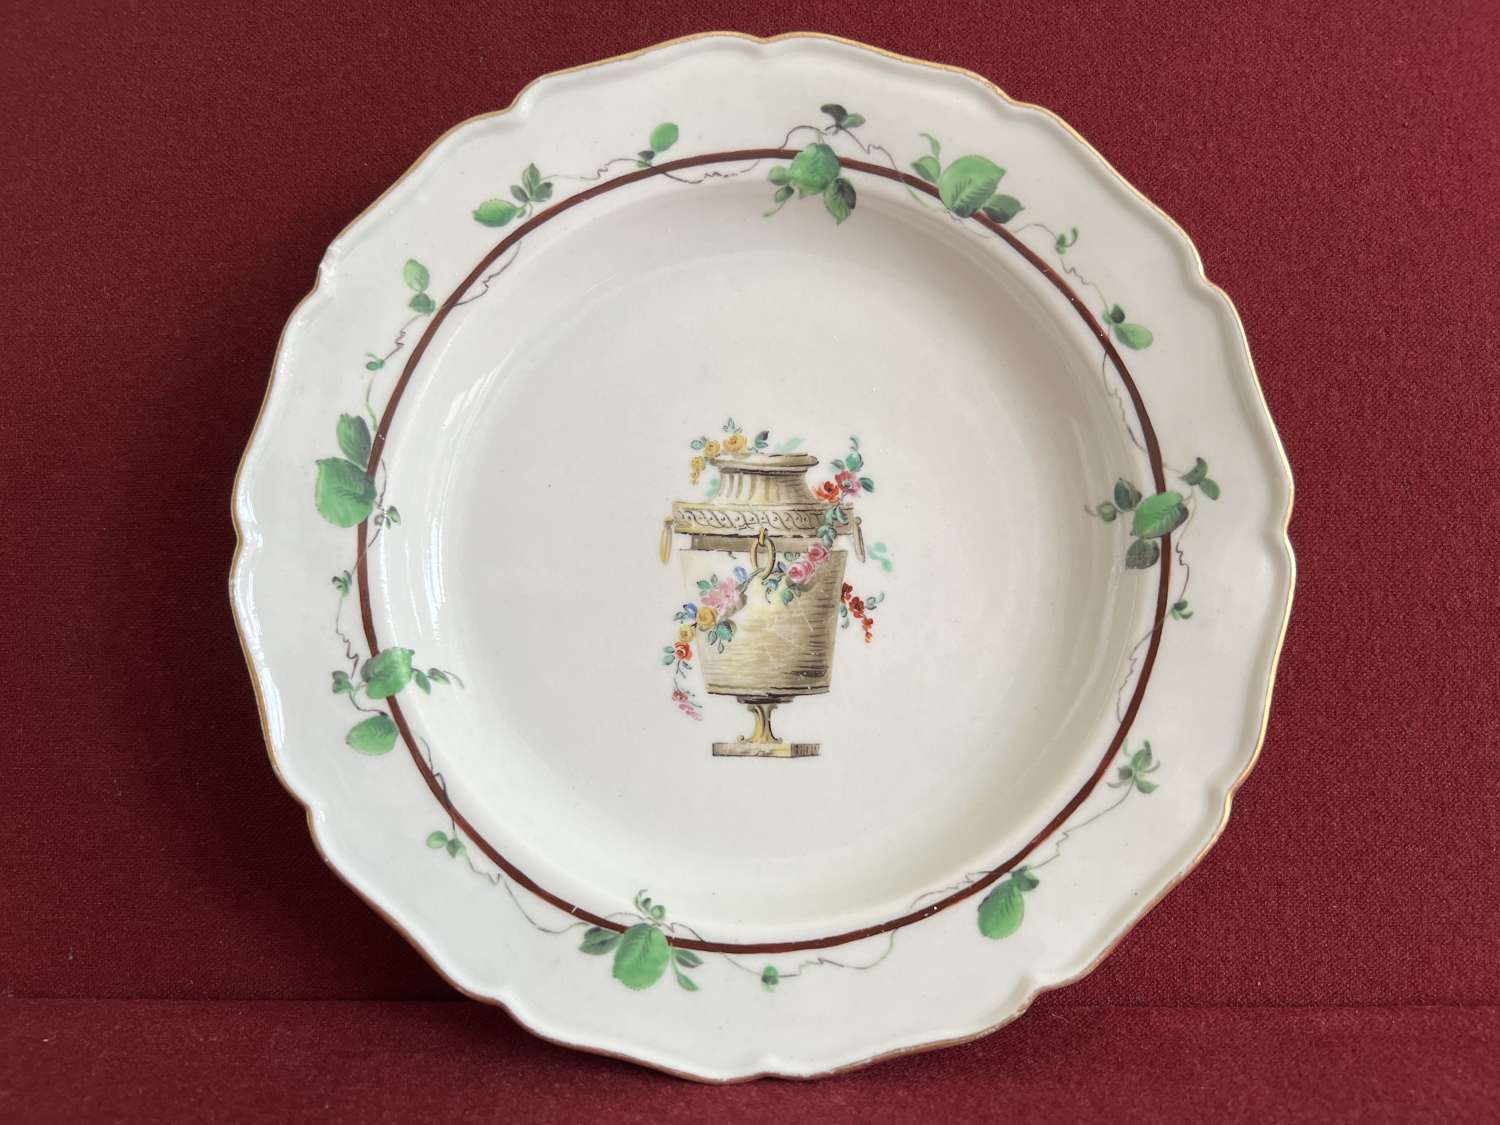 A James Giles decorated Worcester Porcelain Plate c.1770